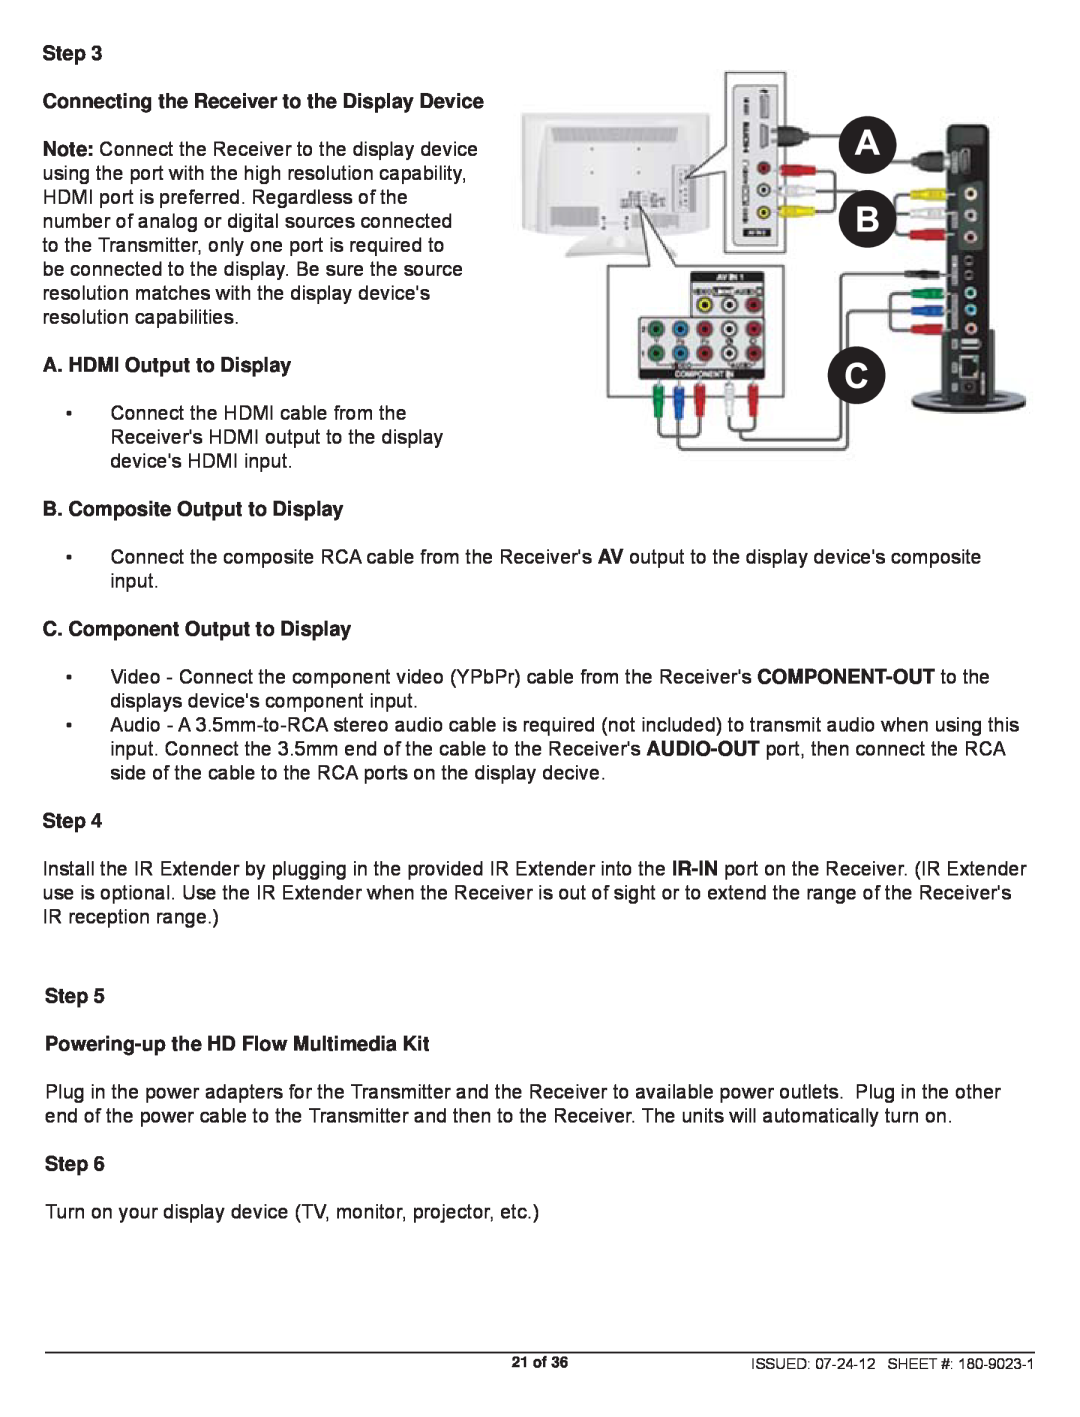 Peerless Industries HDS200 user manual Step Connecting the Receiver to the Display Device, A. HDMI Output to Display 